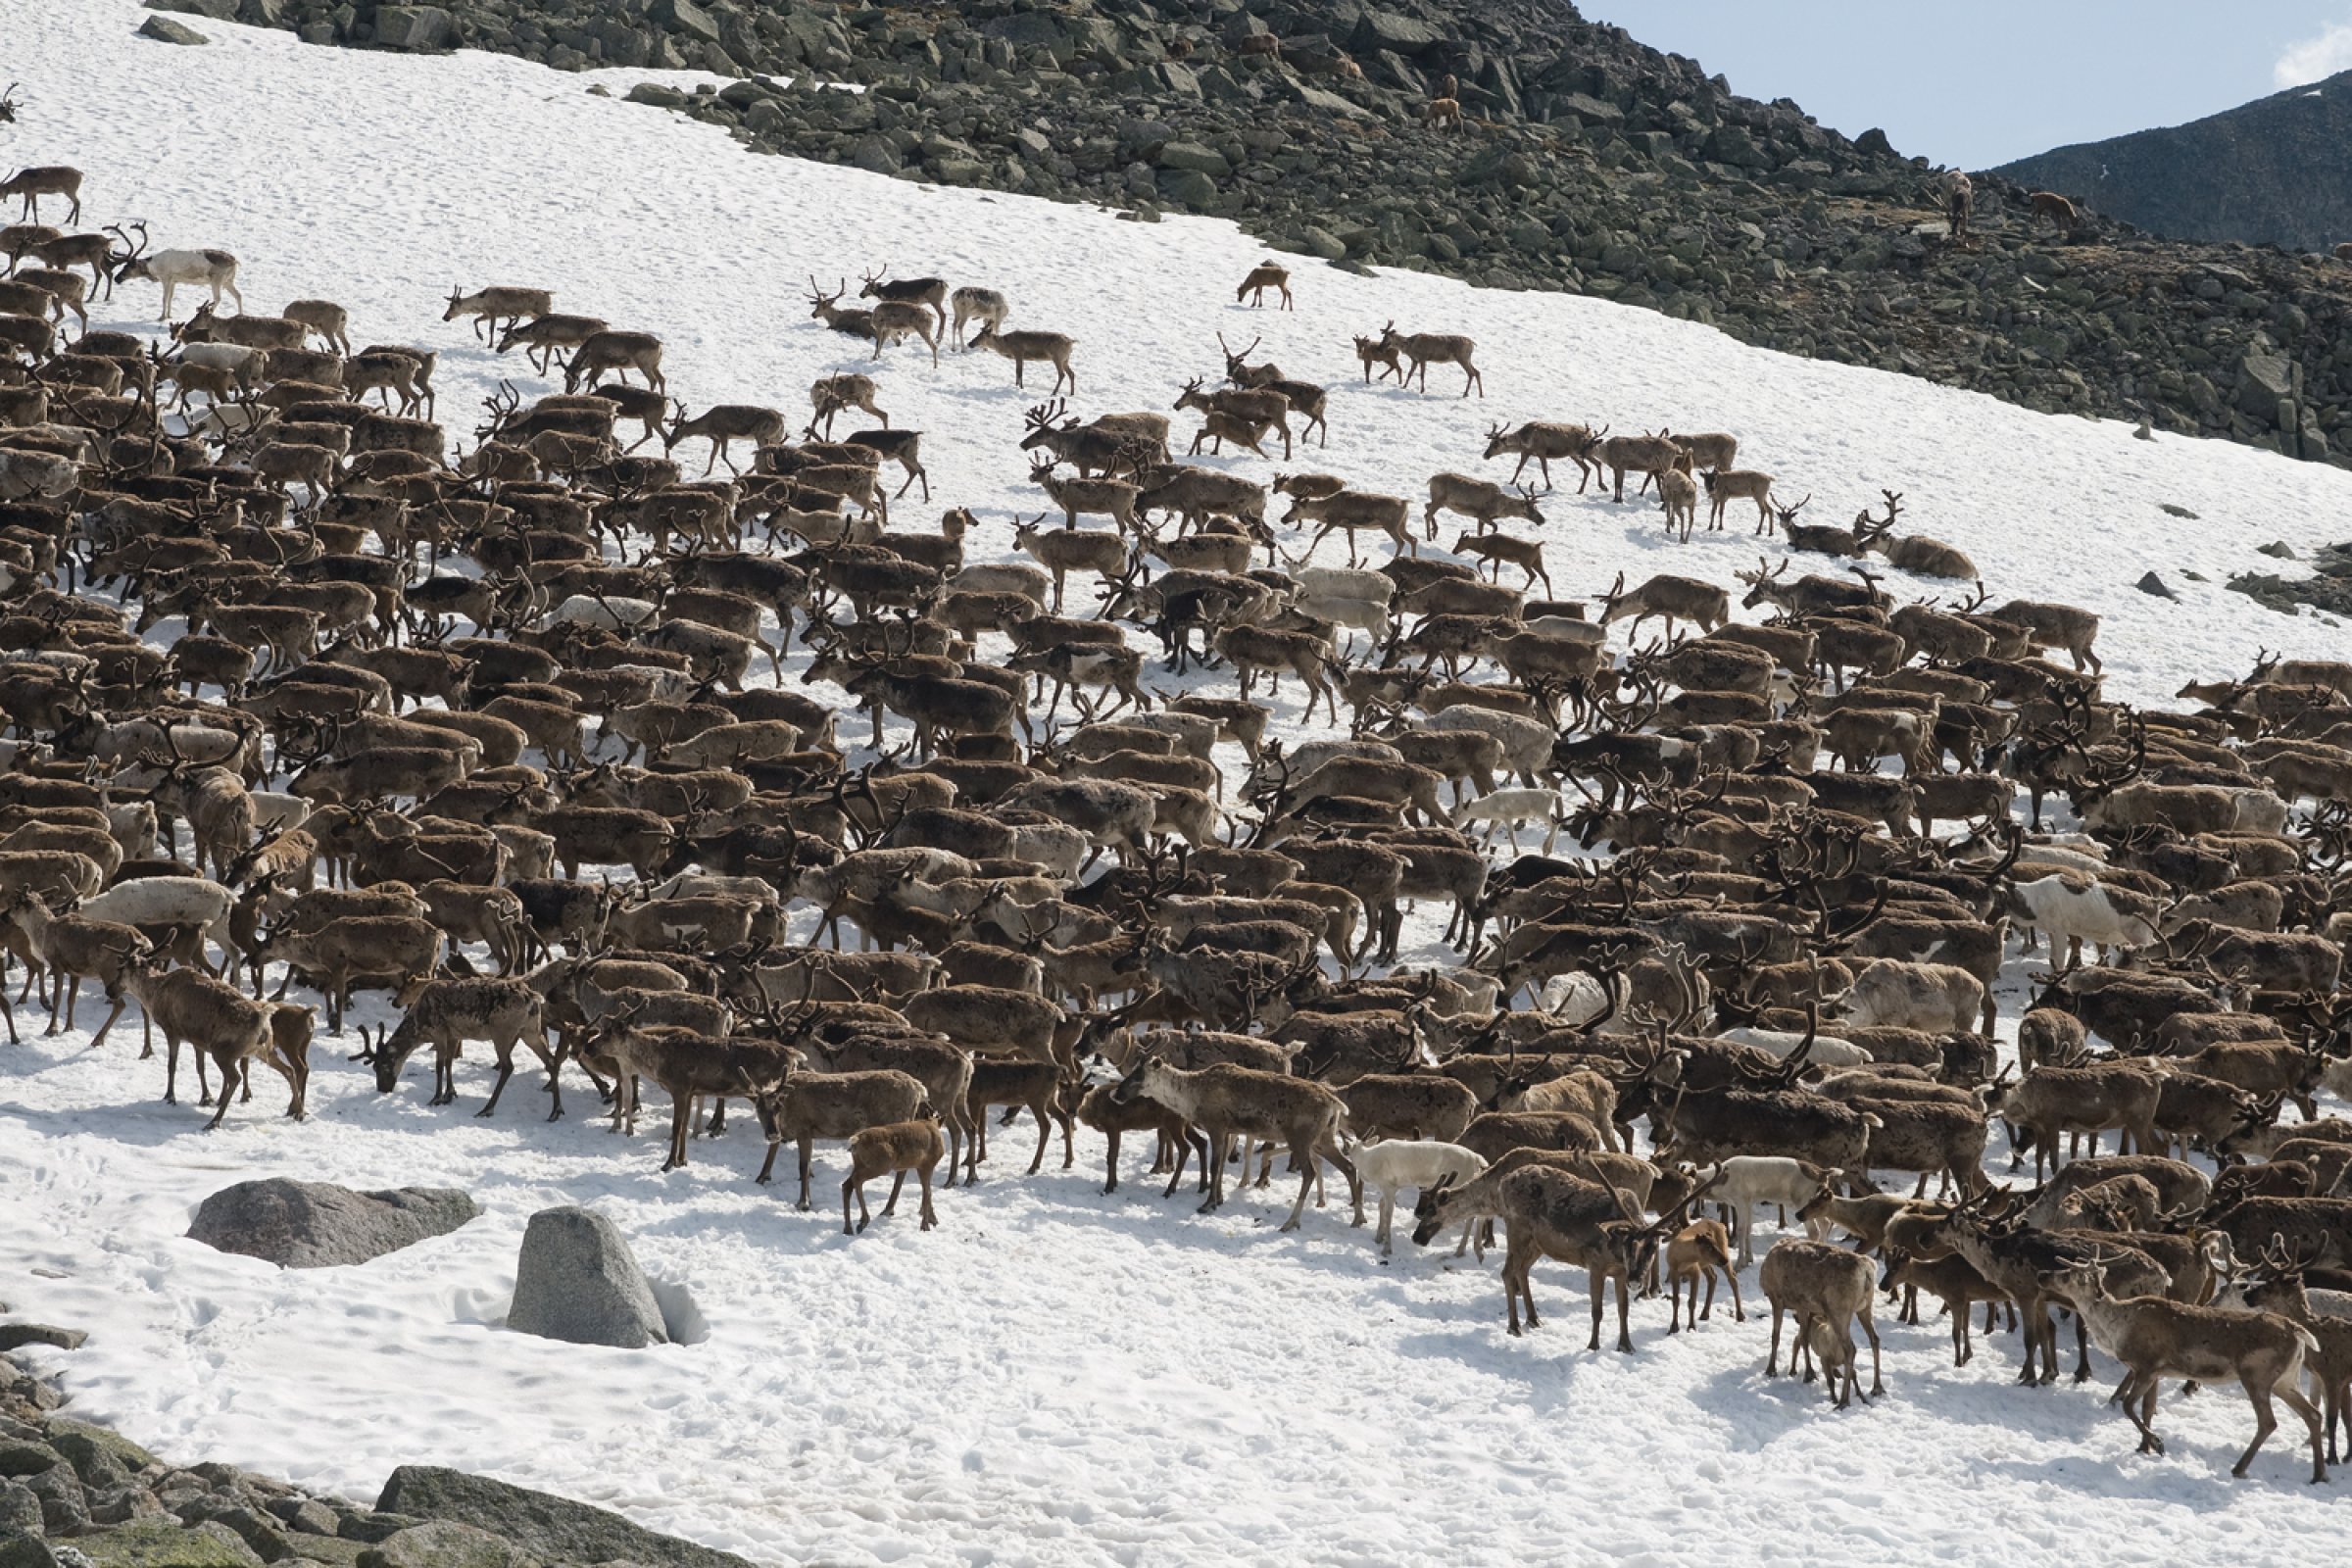 Herd of reindeers pasturing on a snow patch in Ural mountains